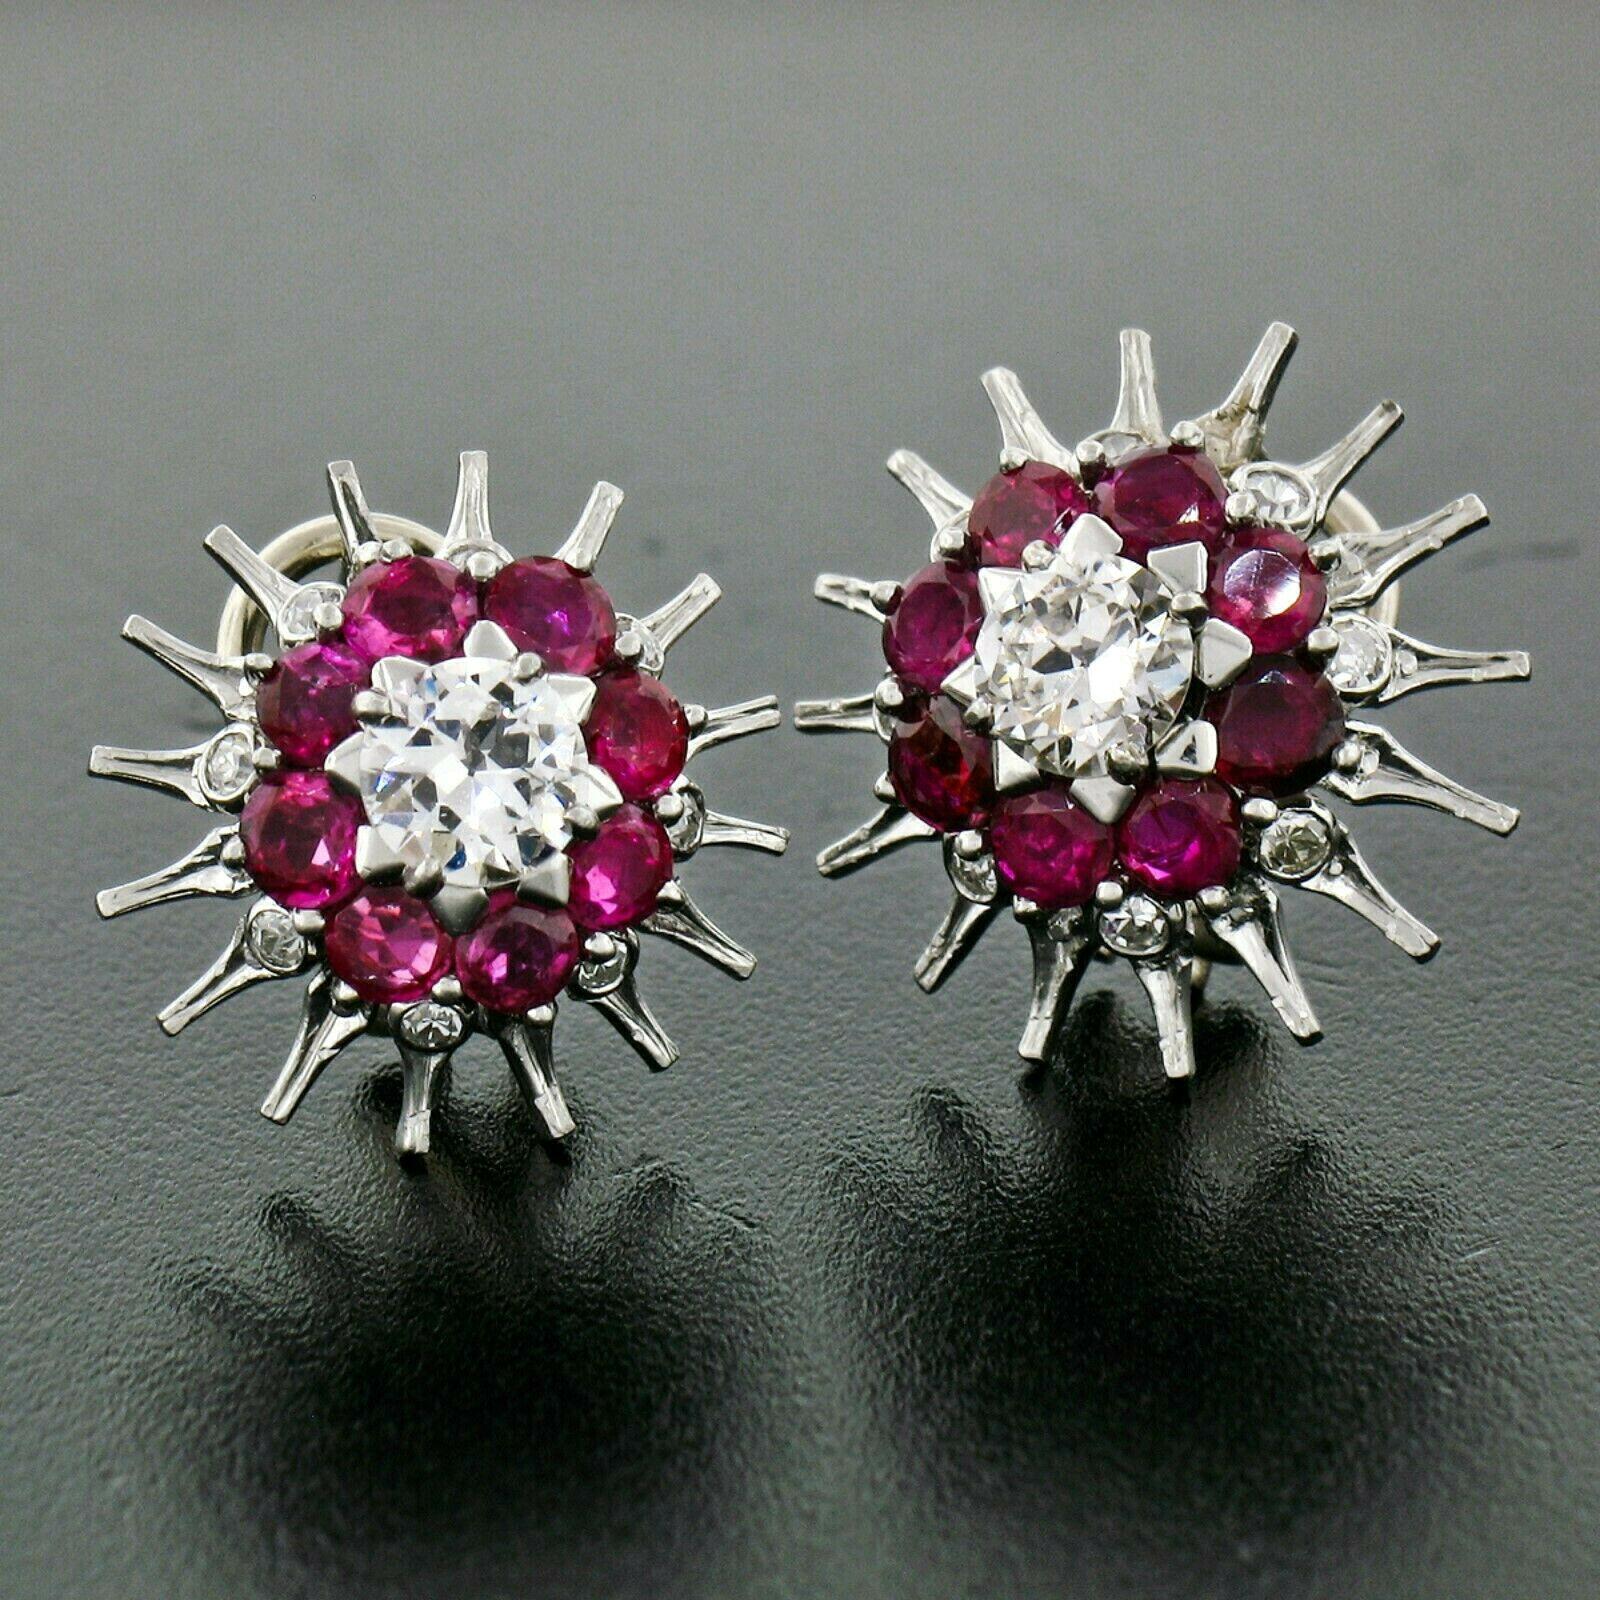 This is an absolutely spectacular pair of earrings crafted with absolute mastery, top quality gems, and top quality diamonds during the art deco period. The rubies are simply breathtaking with their rich and vibrant red color. The rubies are then